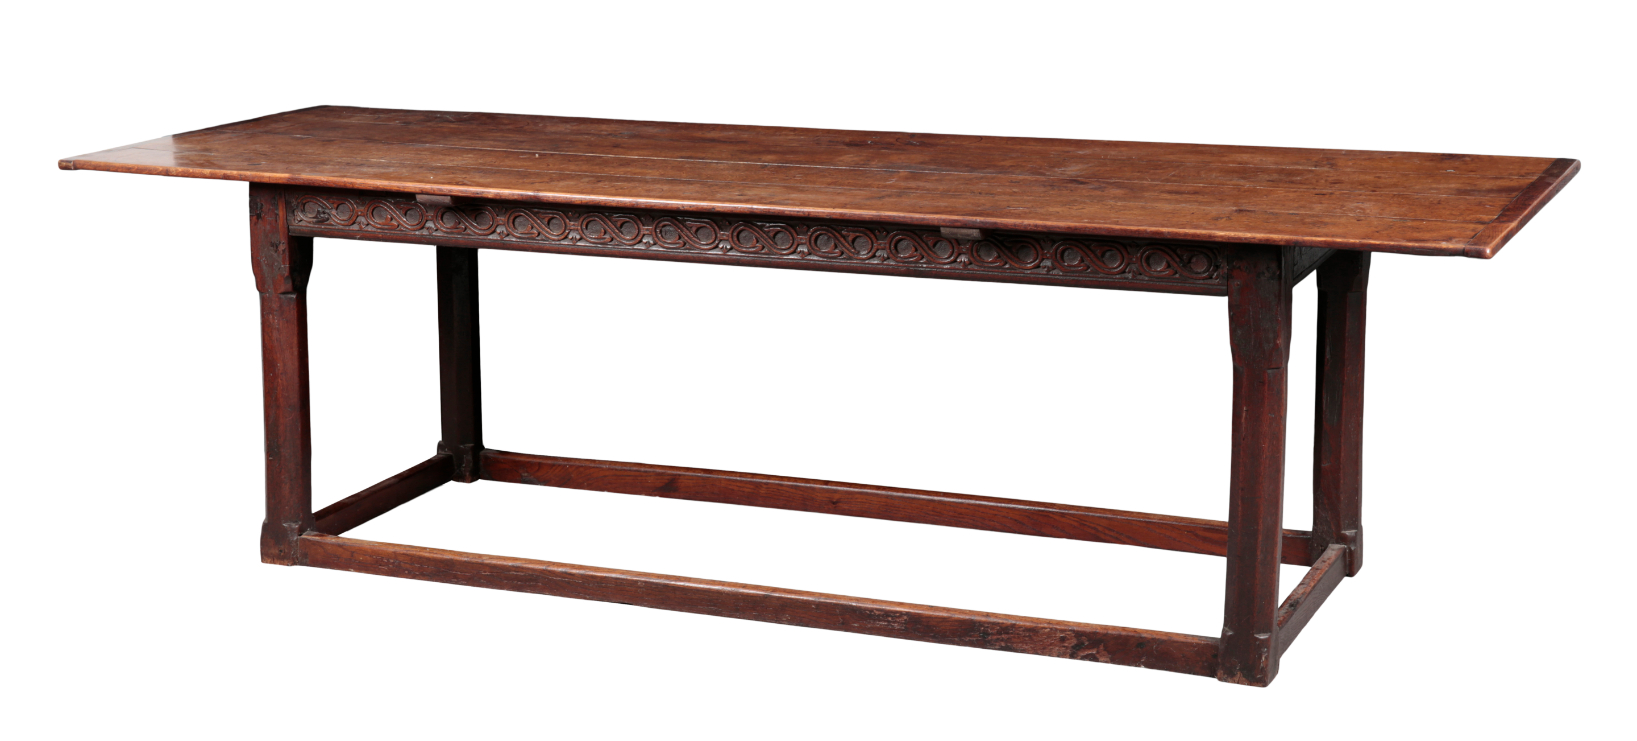 AN OAK REFECTORY TABLE 17th century